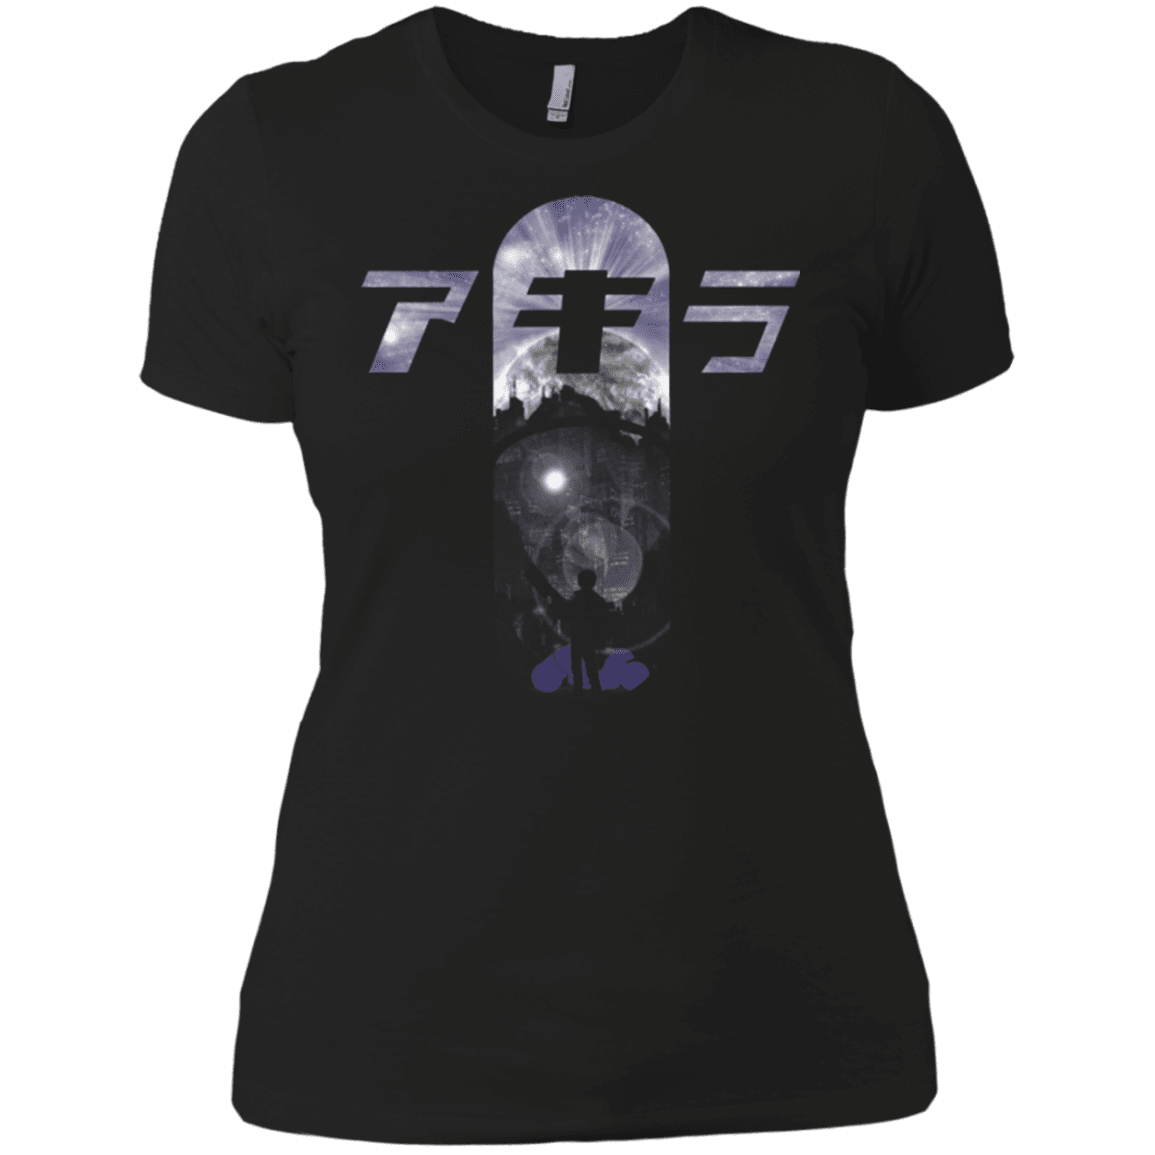 T-Shirts Black / X-Small About to Explode Women's Premium T-Shirt